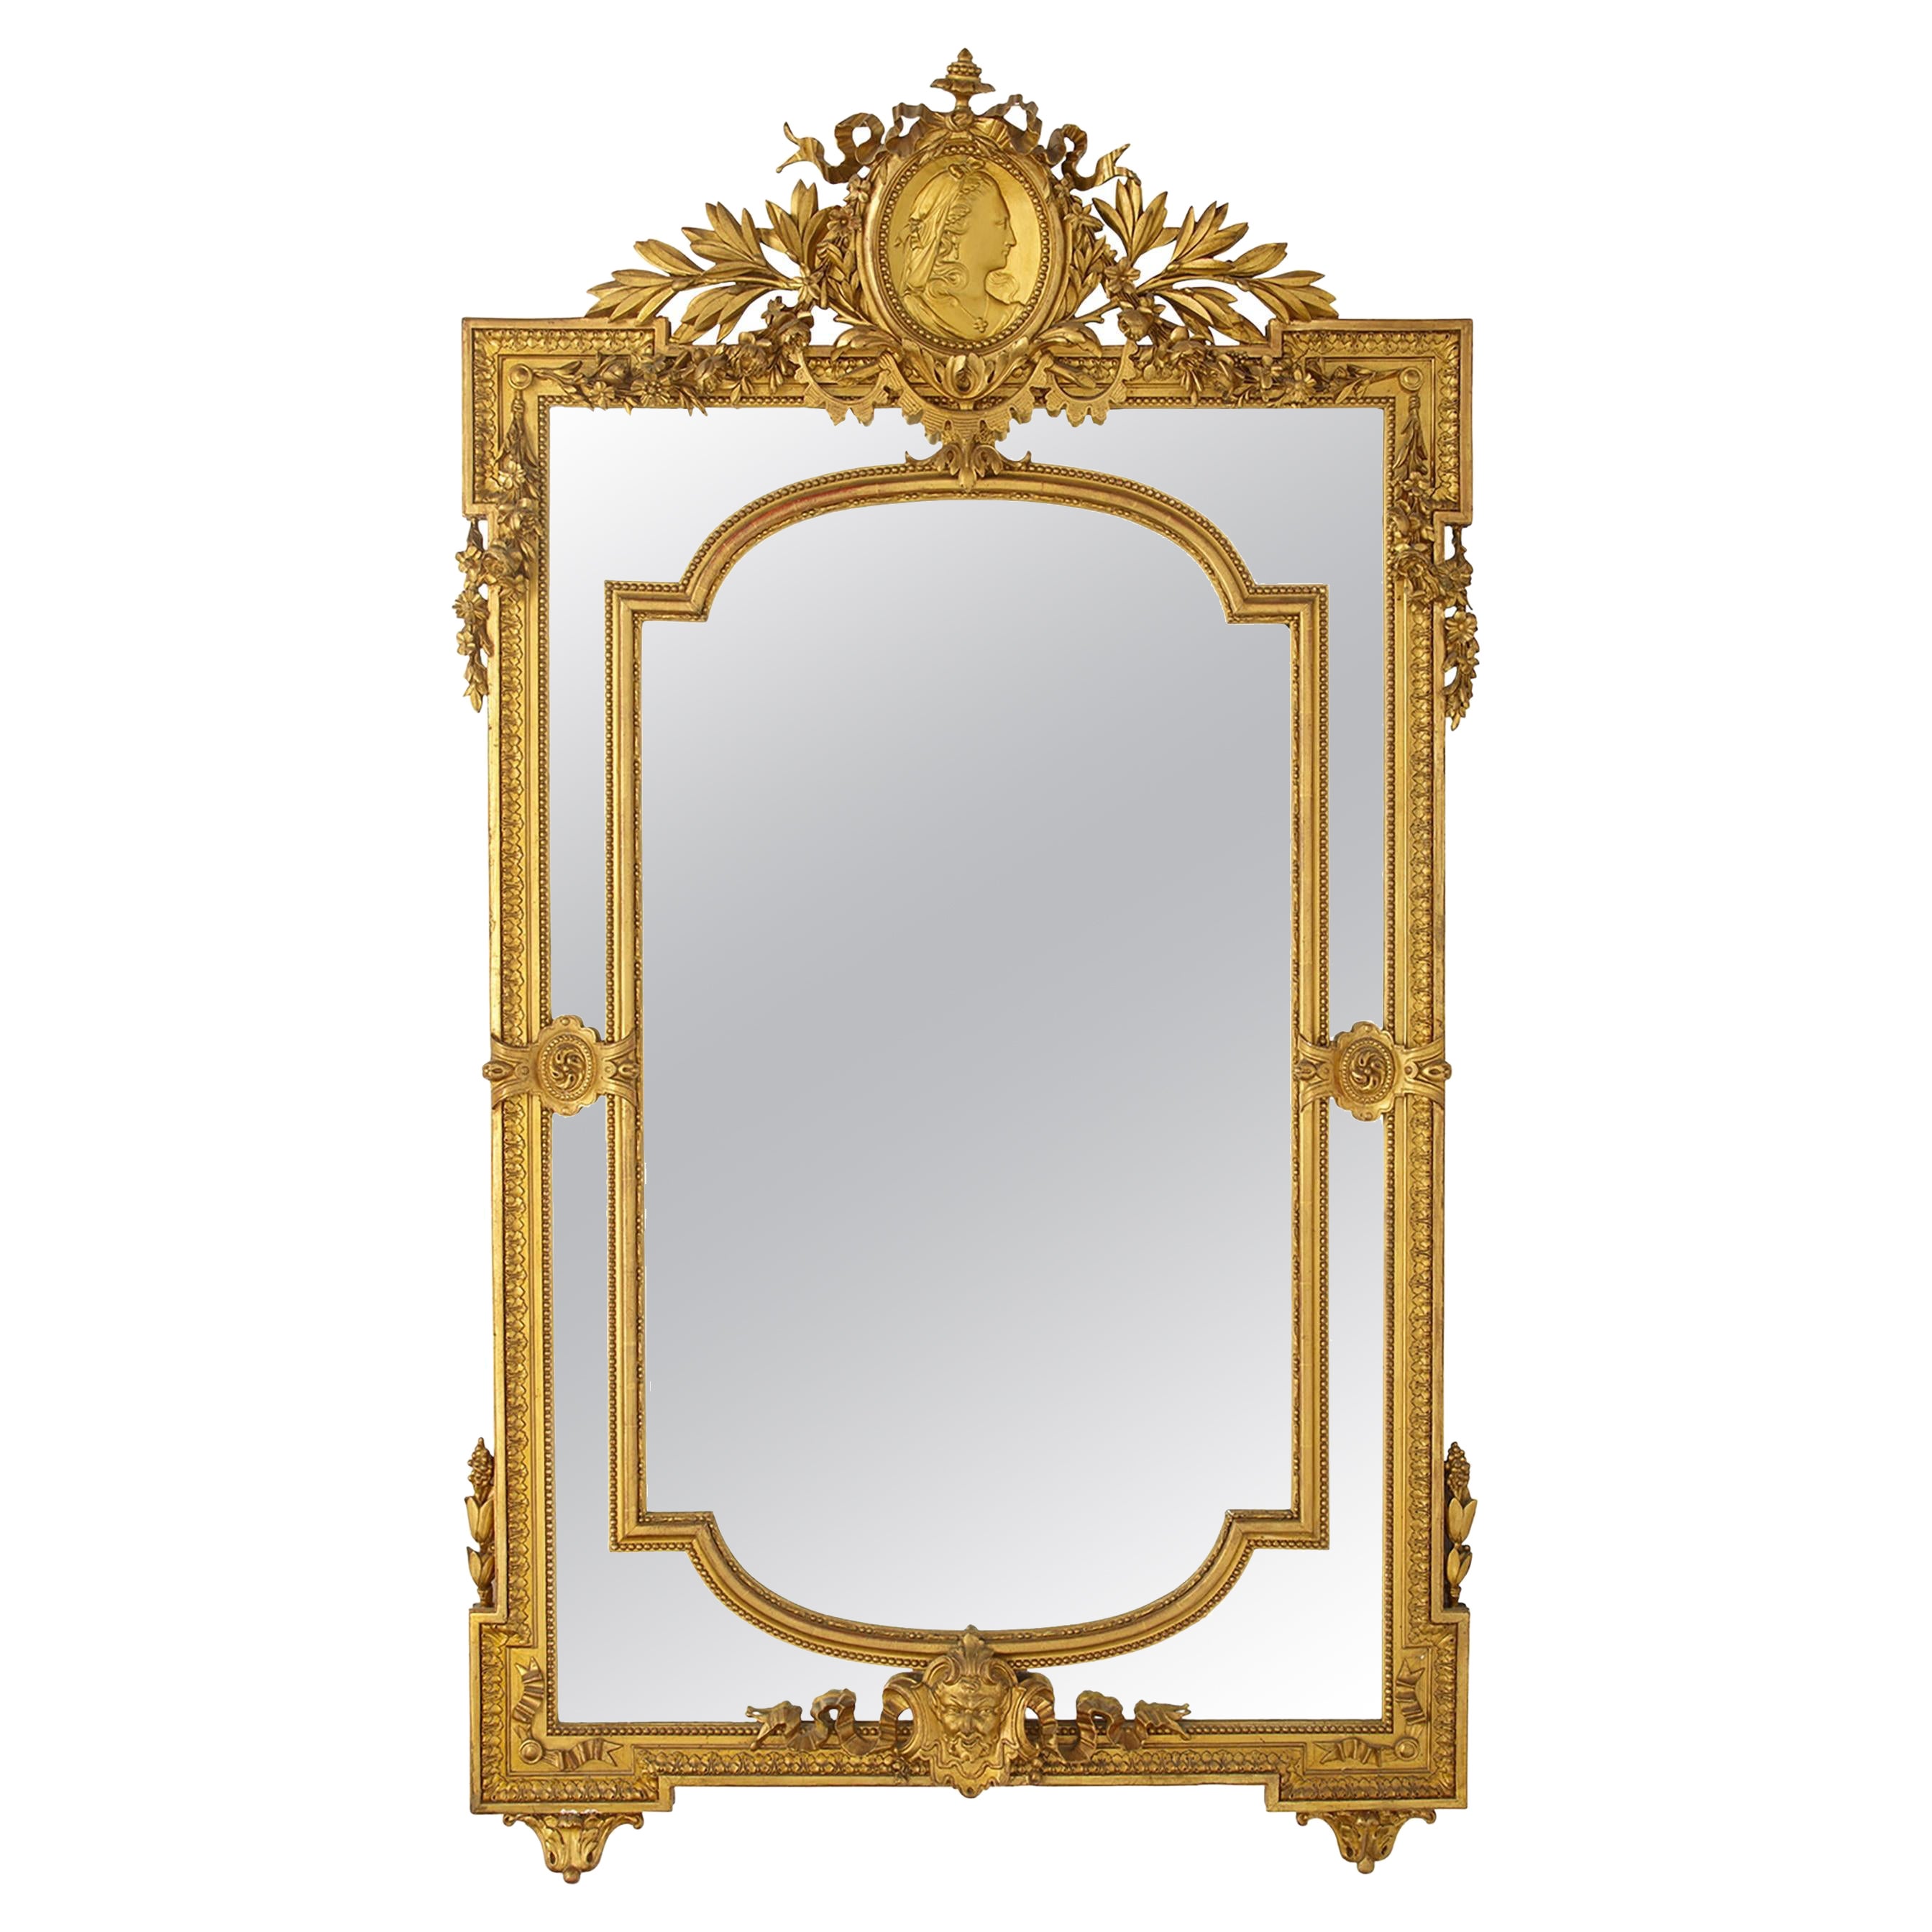 French 19th Century Louis XVI Style Gilt-Wood and Gilt-Gesso Carved Pier Mirror For Sale